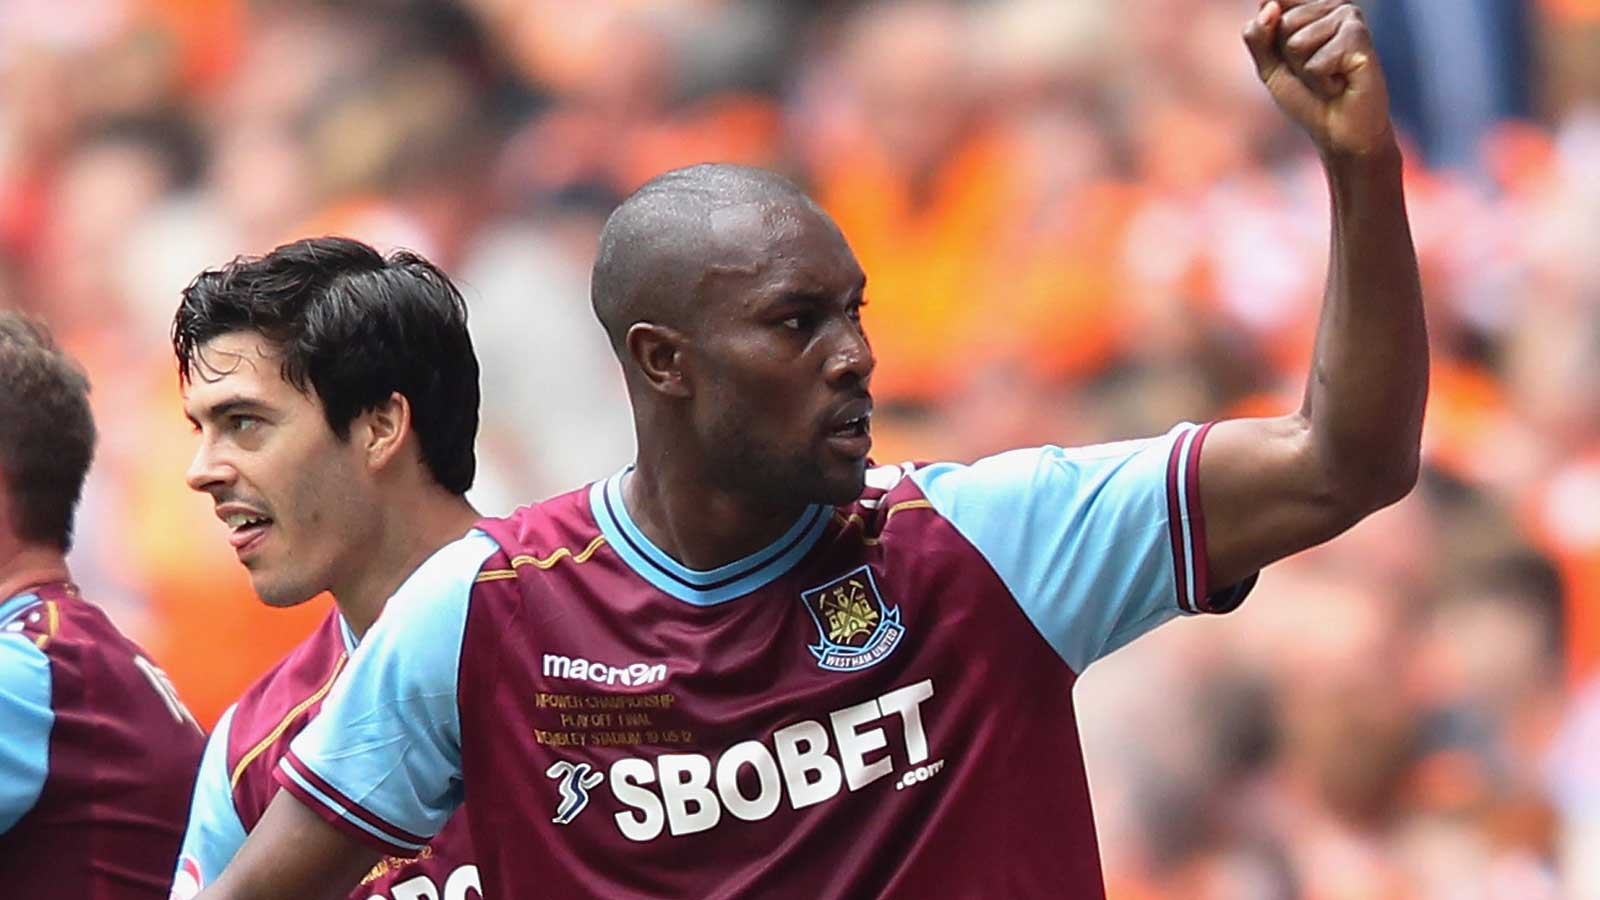 Carlton Cole celebrates his goal against Blackpool in the play-off final